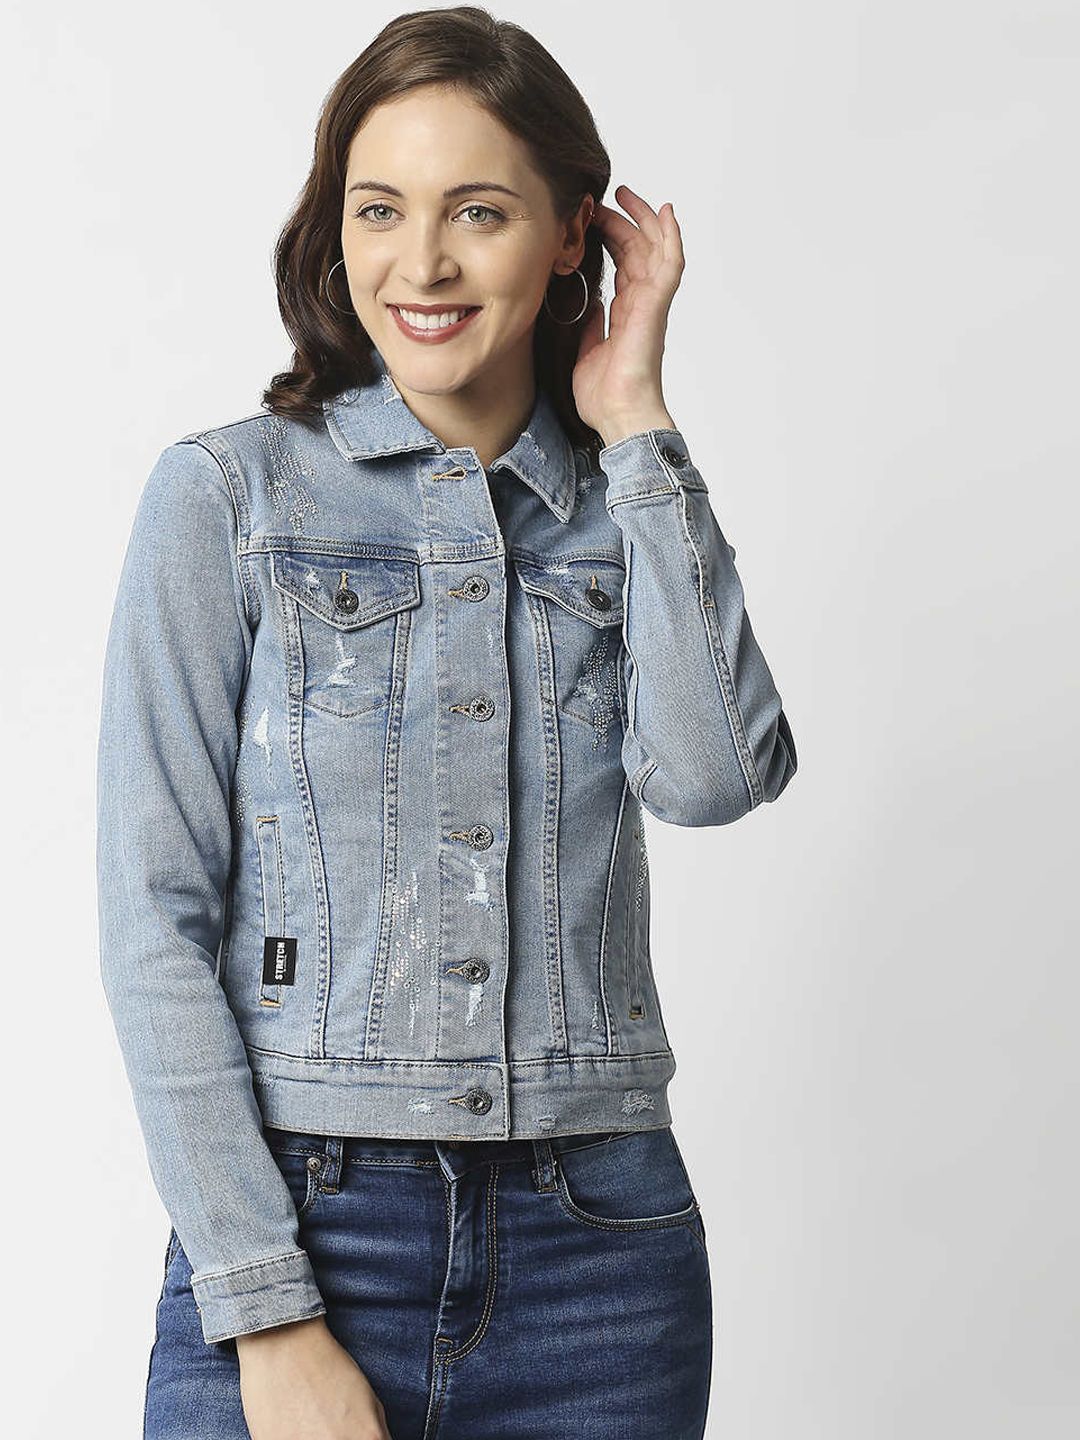 Pepe Jeans Women Blue Washed Crop Denim Jacket Price in India